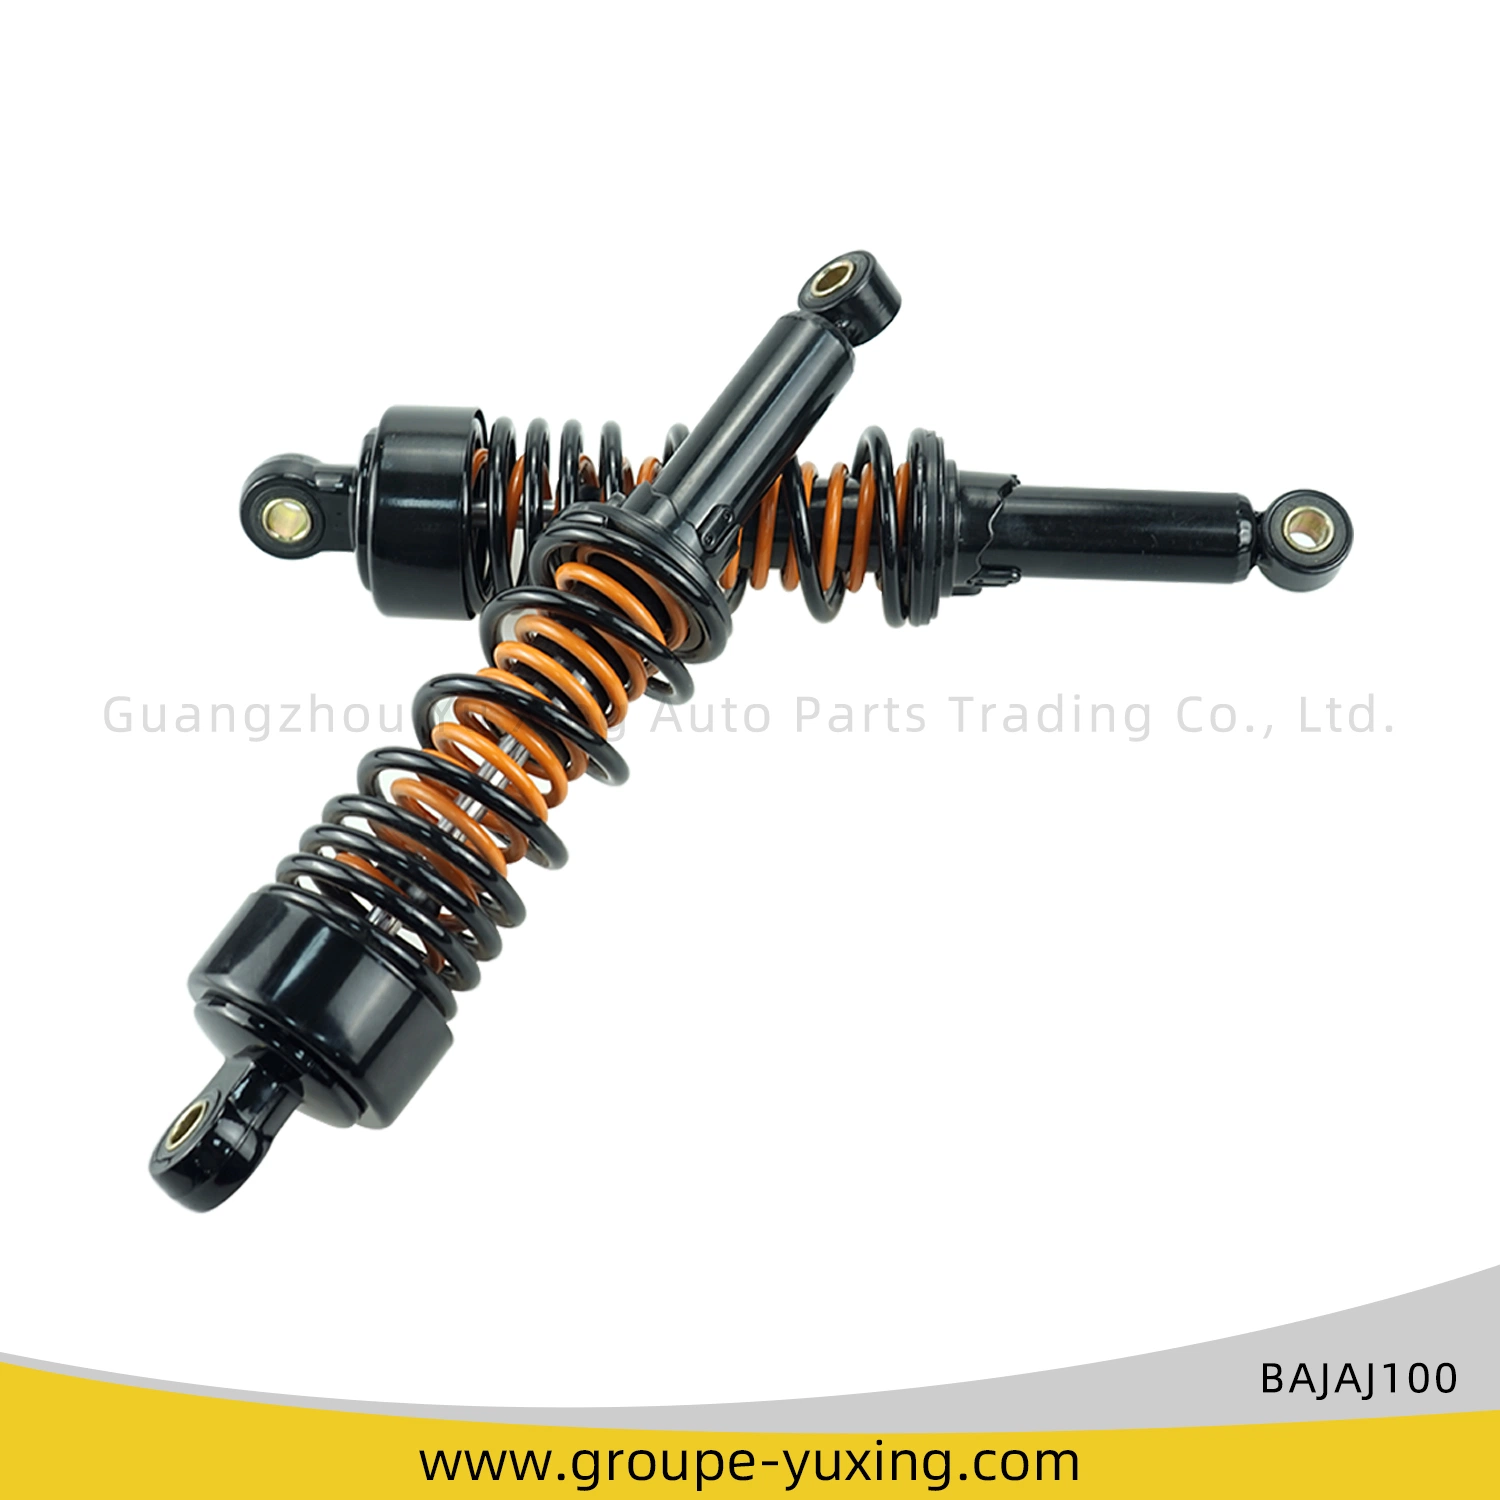 Rear Shock Absorber of Motorcycle Parts